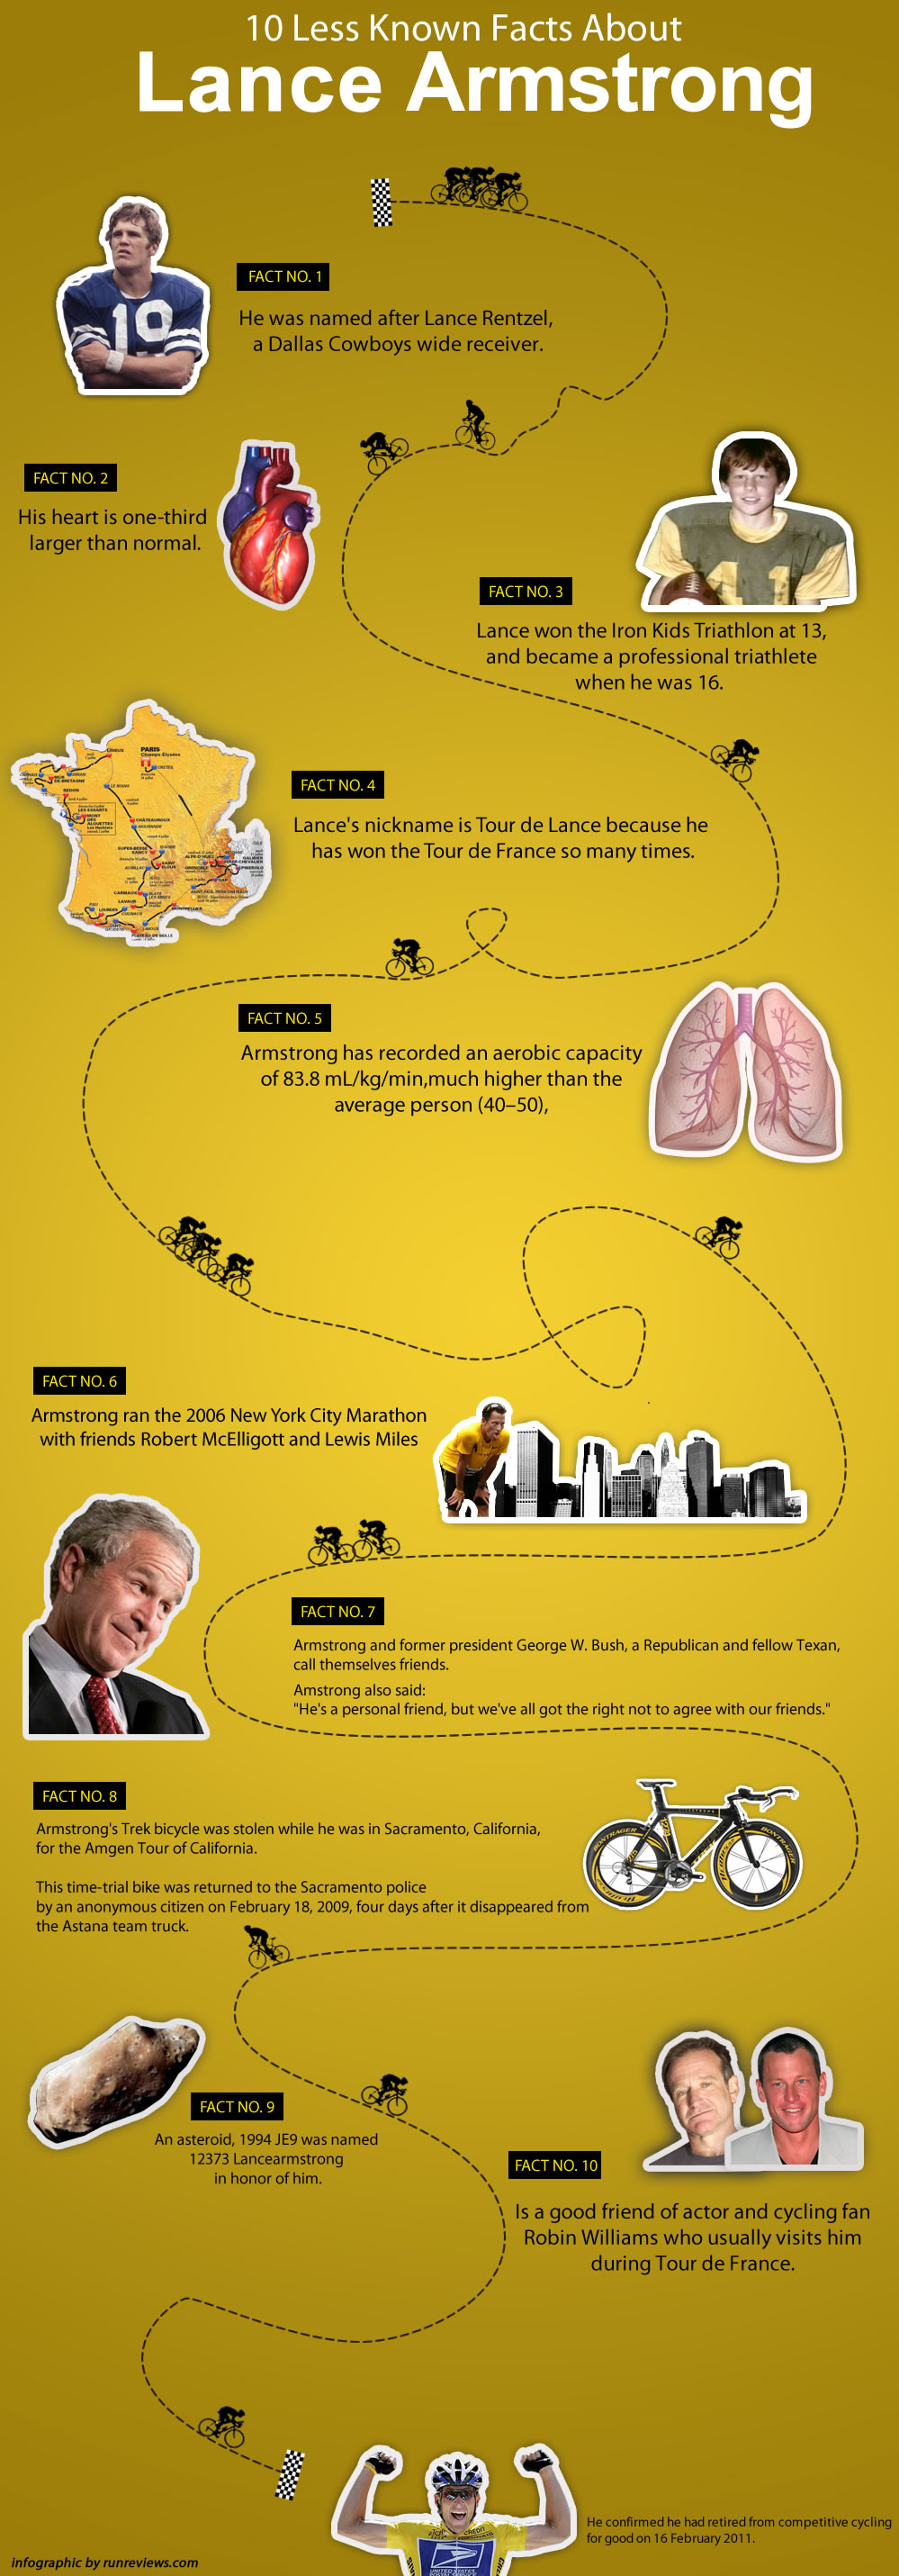 lance armstrong infographic